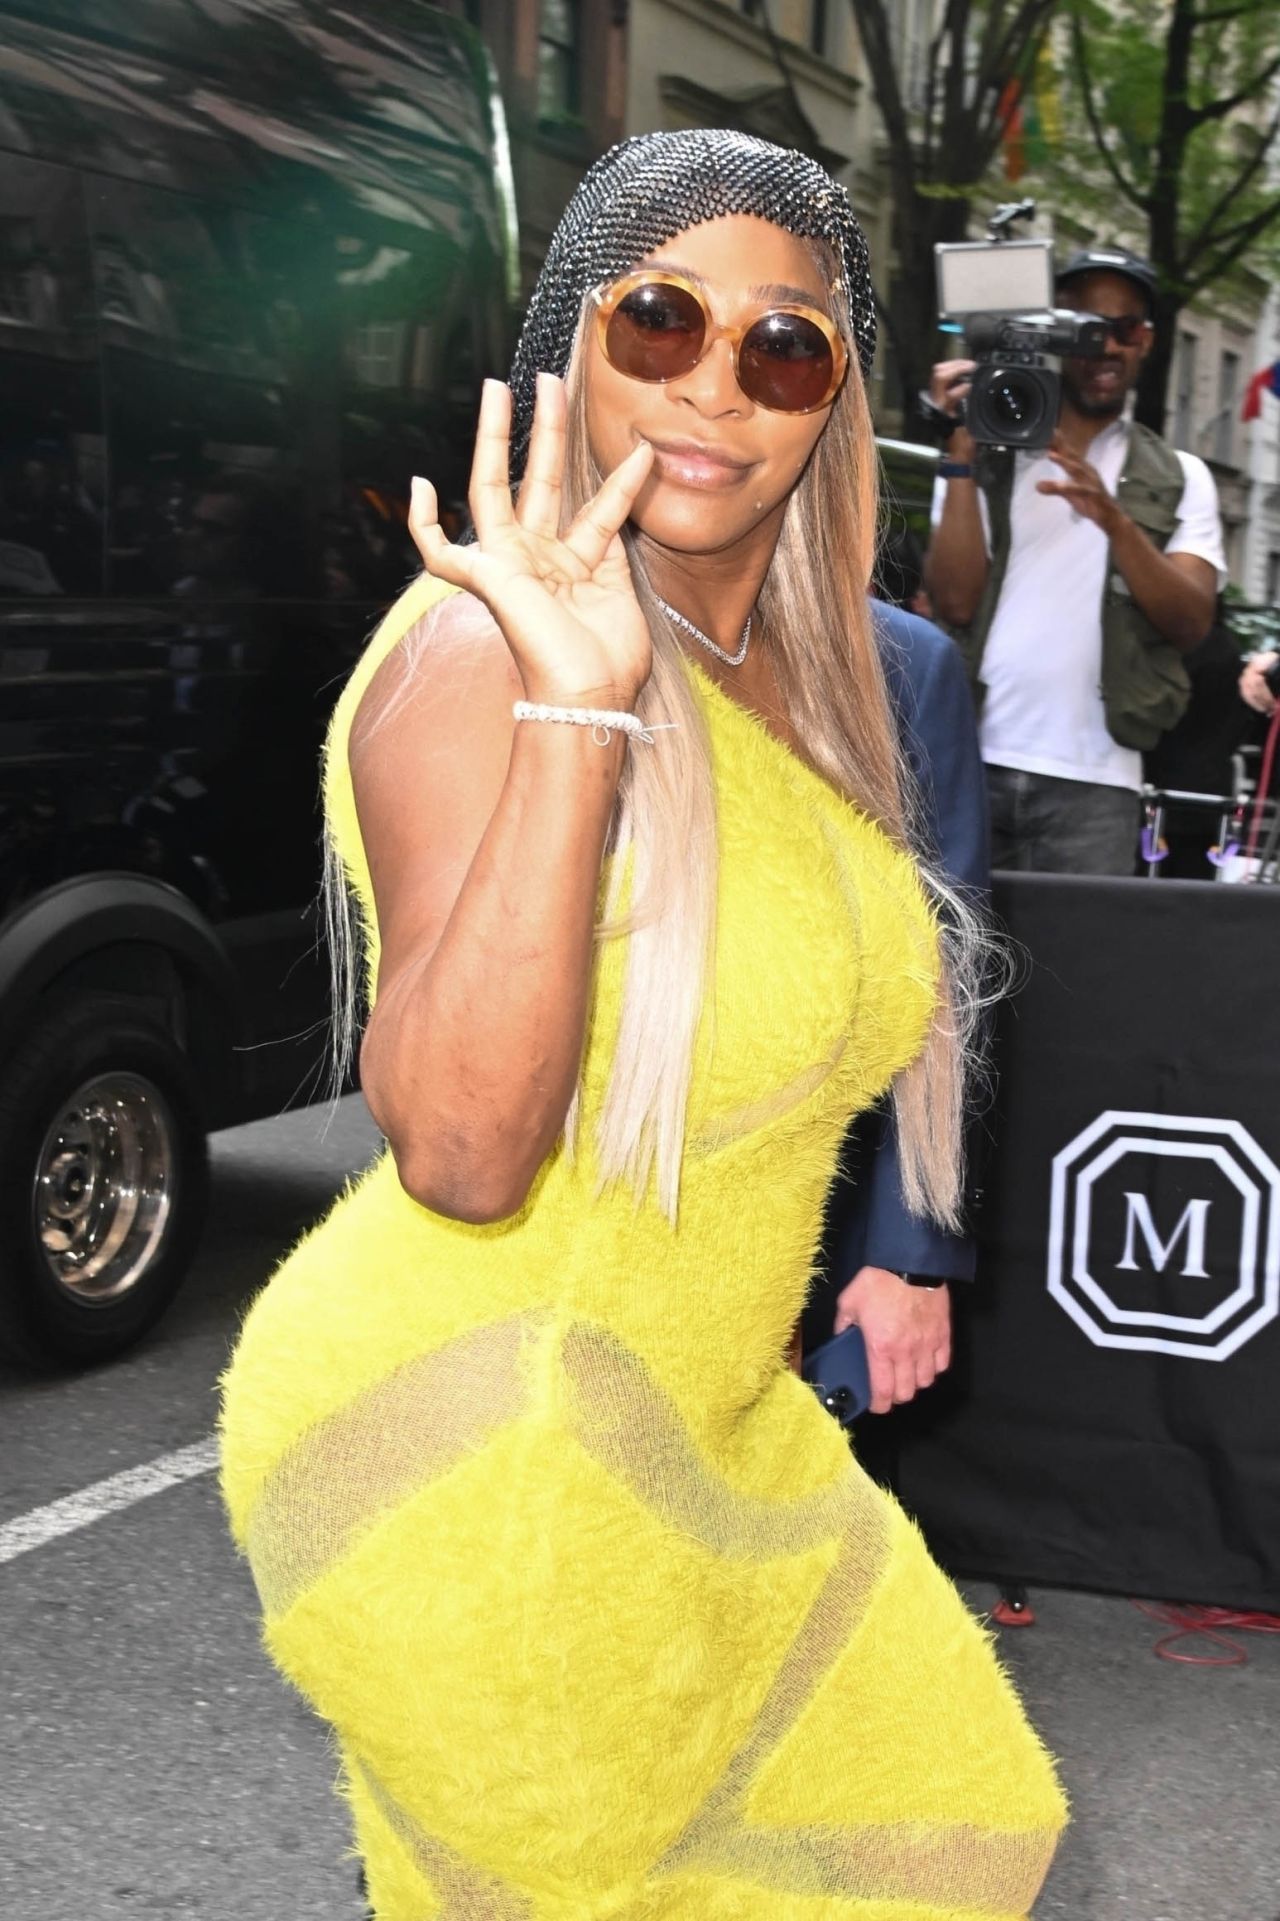 SERENA WILLIAMS IN A BRIGHT YELLOW DRESS IN NEW YORK2